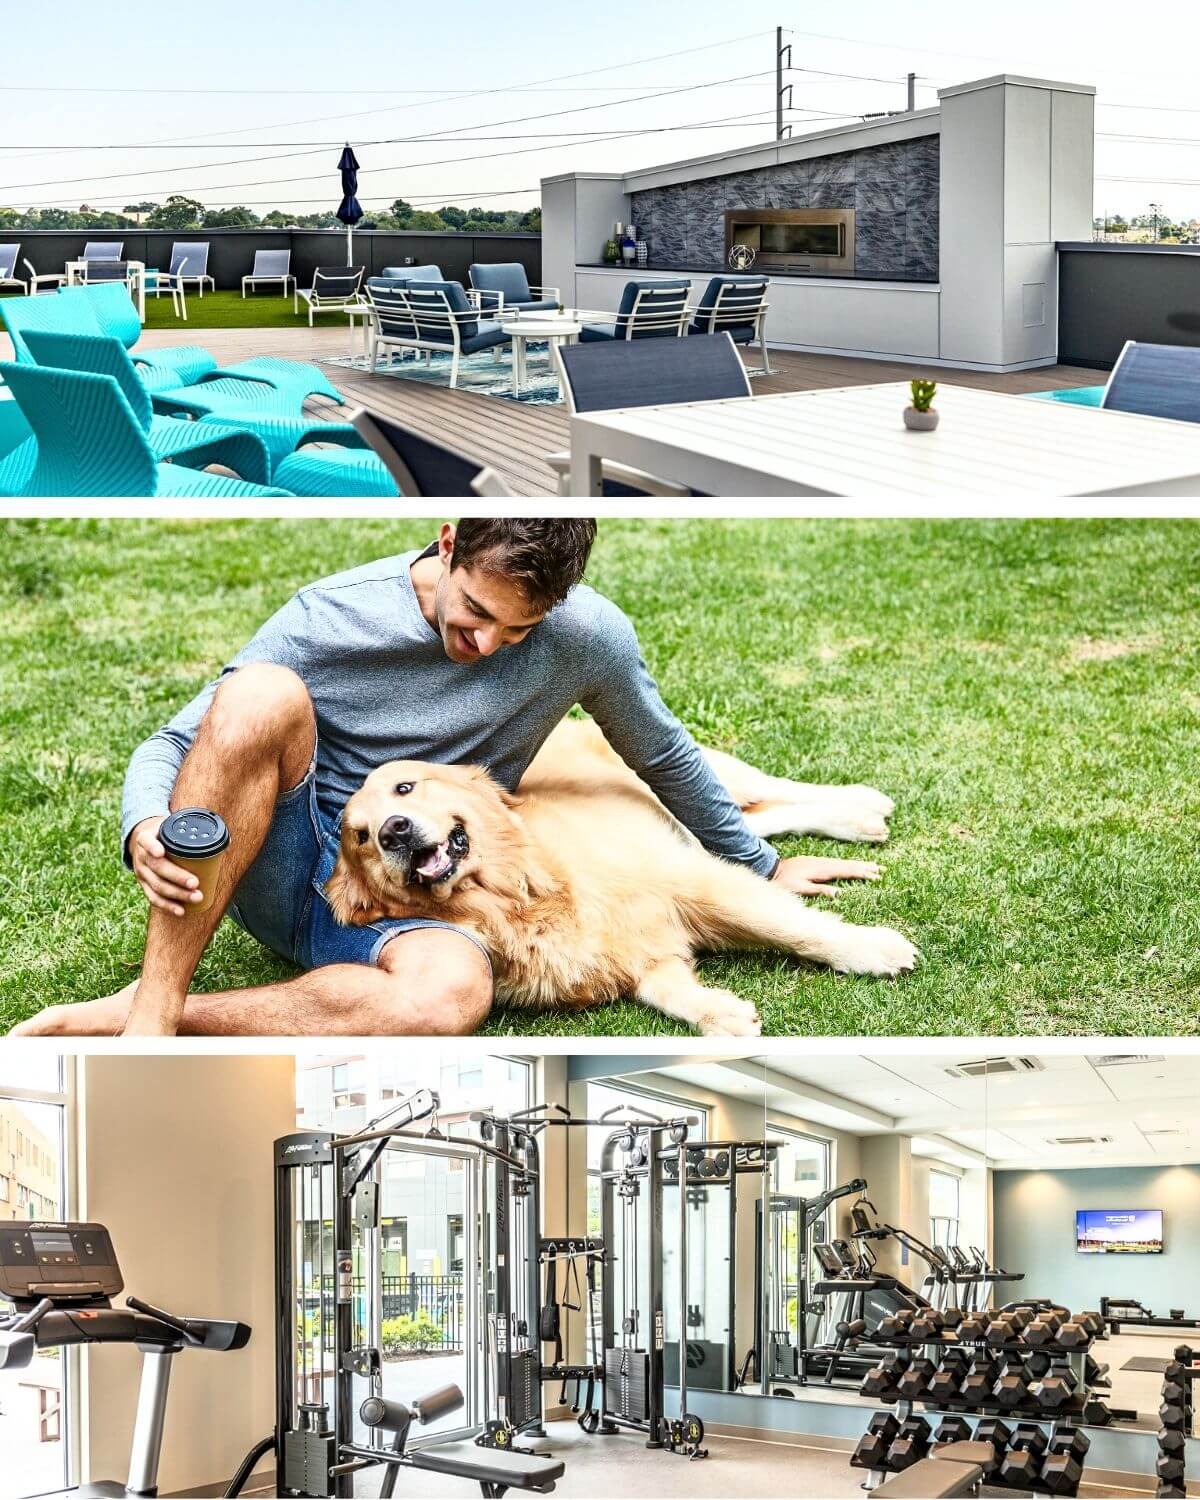 Outdoor area with seating. Man playing with dog and view of gym